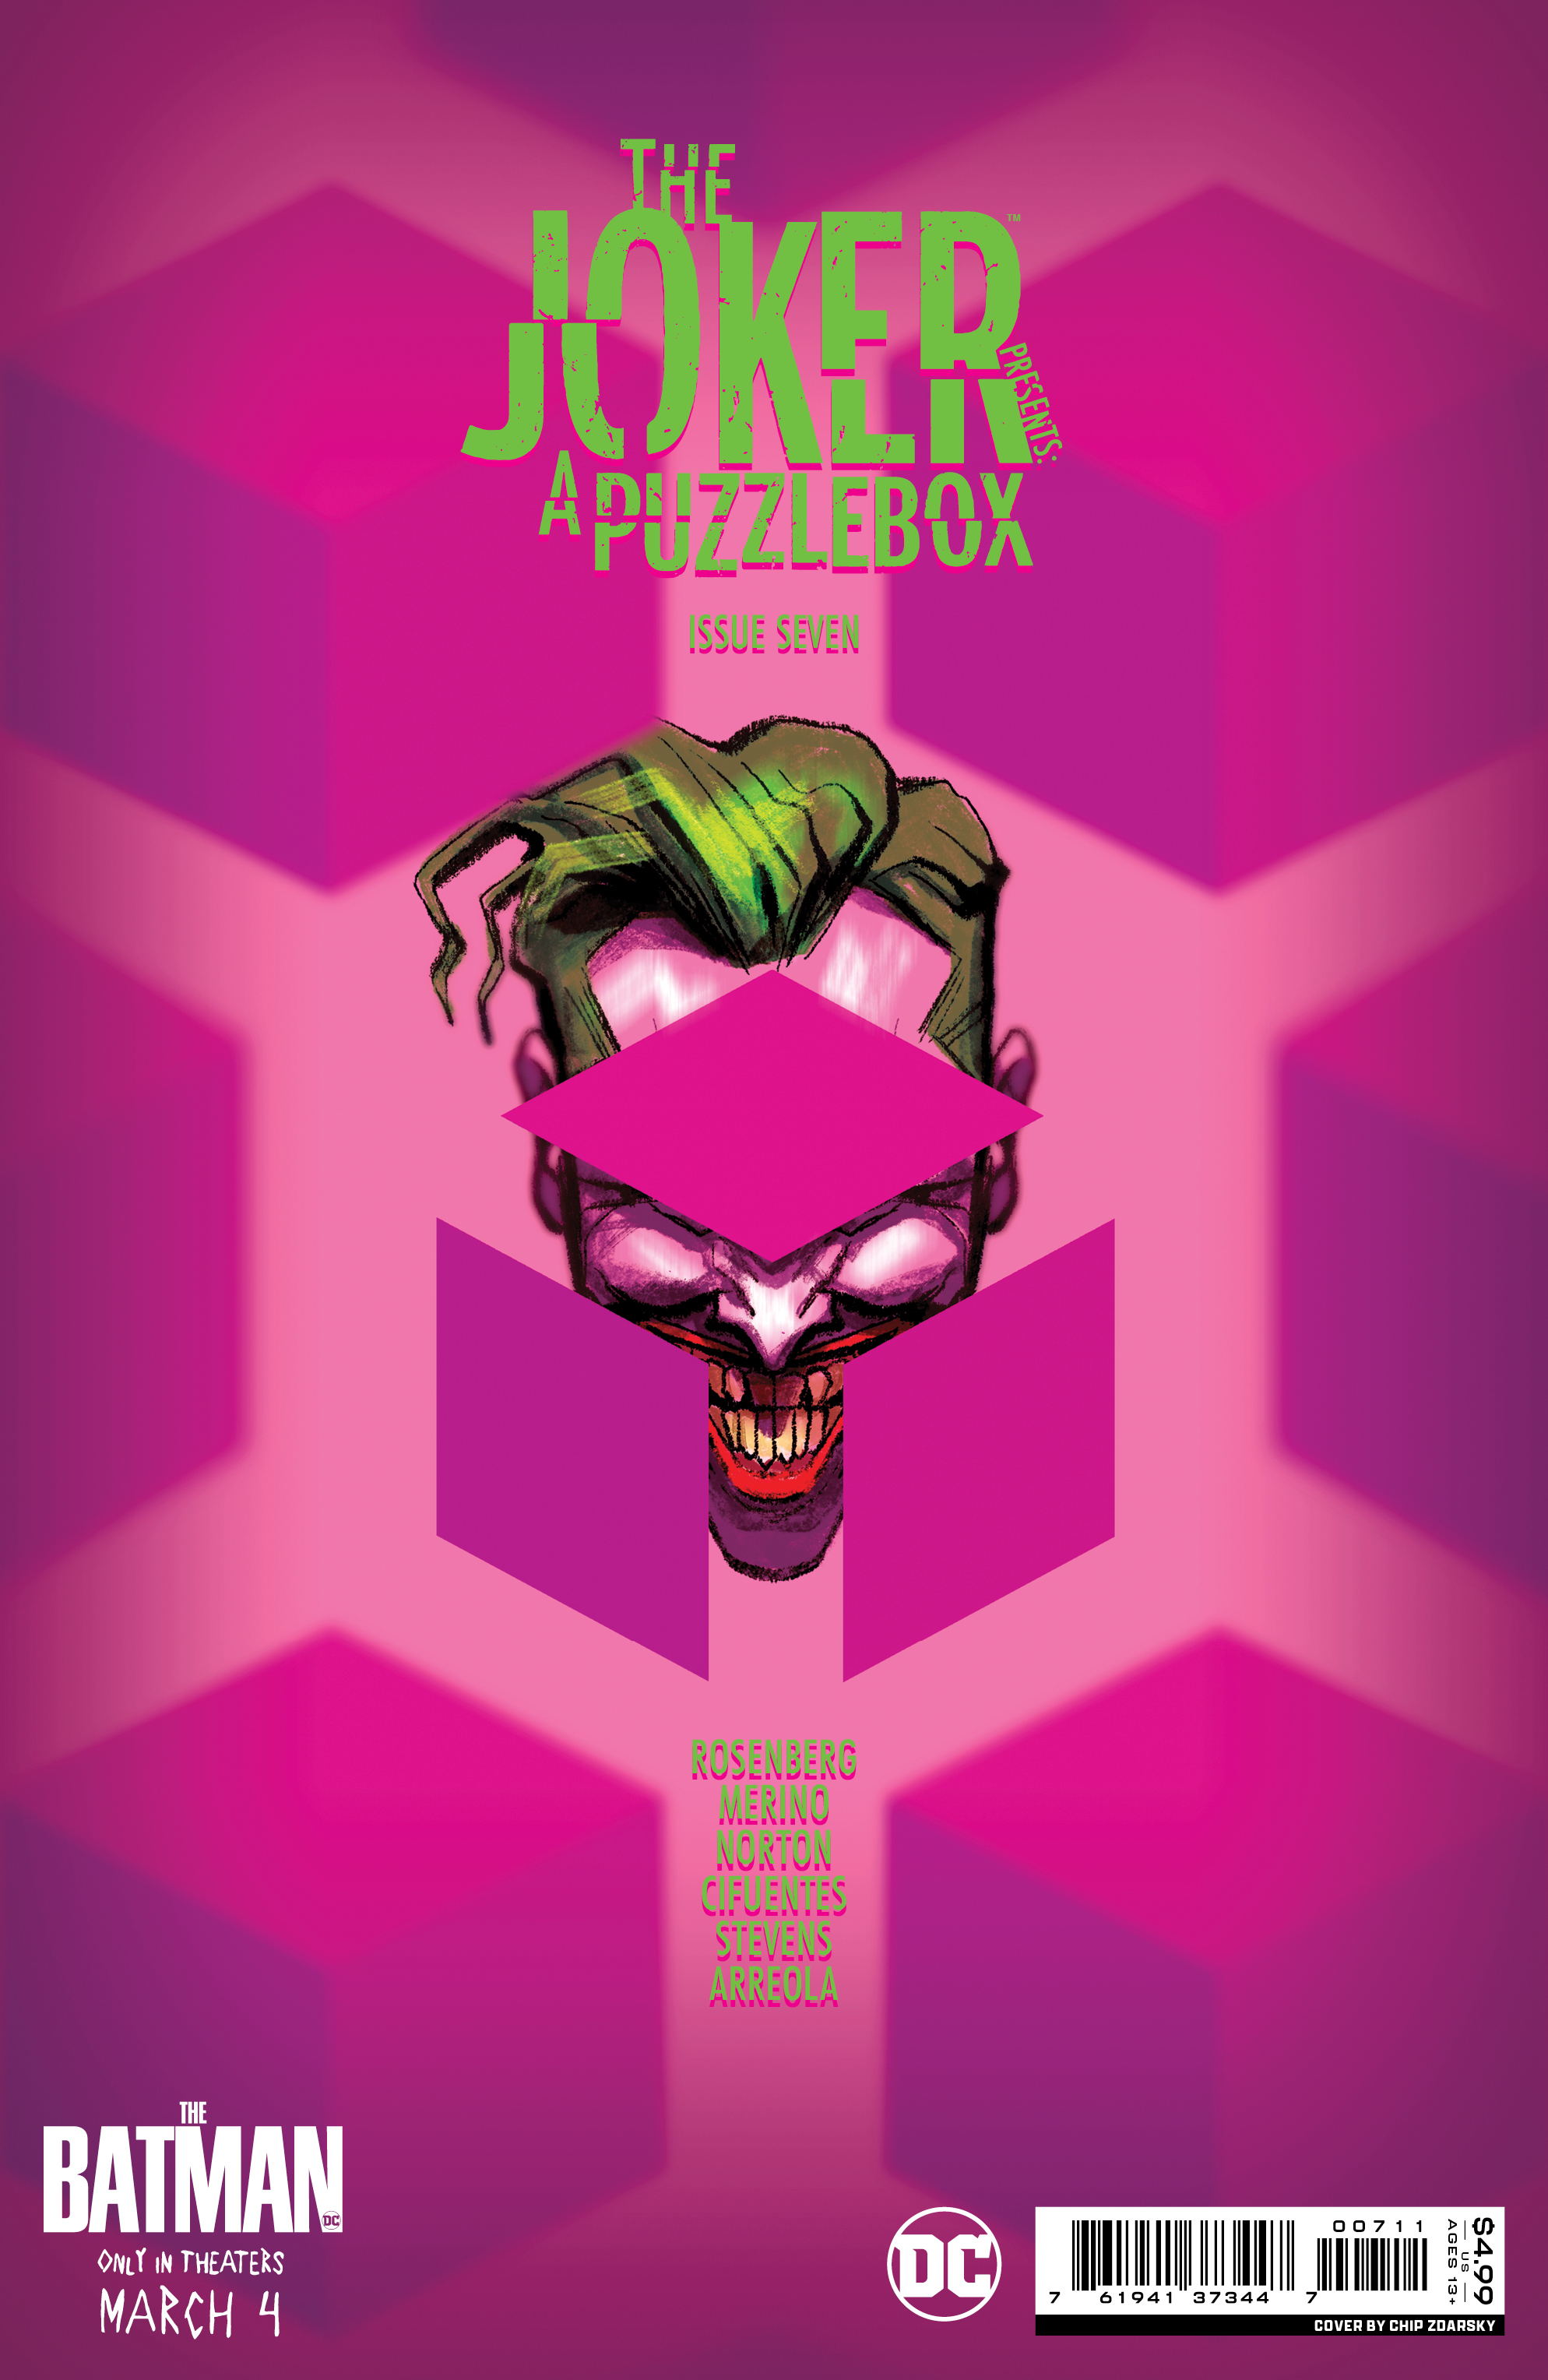 Joker Presents A Puzzlebox #7 Cover A Chip Zdarsky (Of 7)